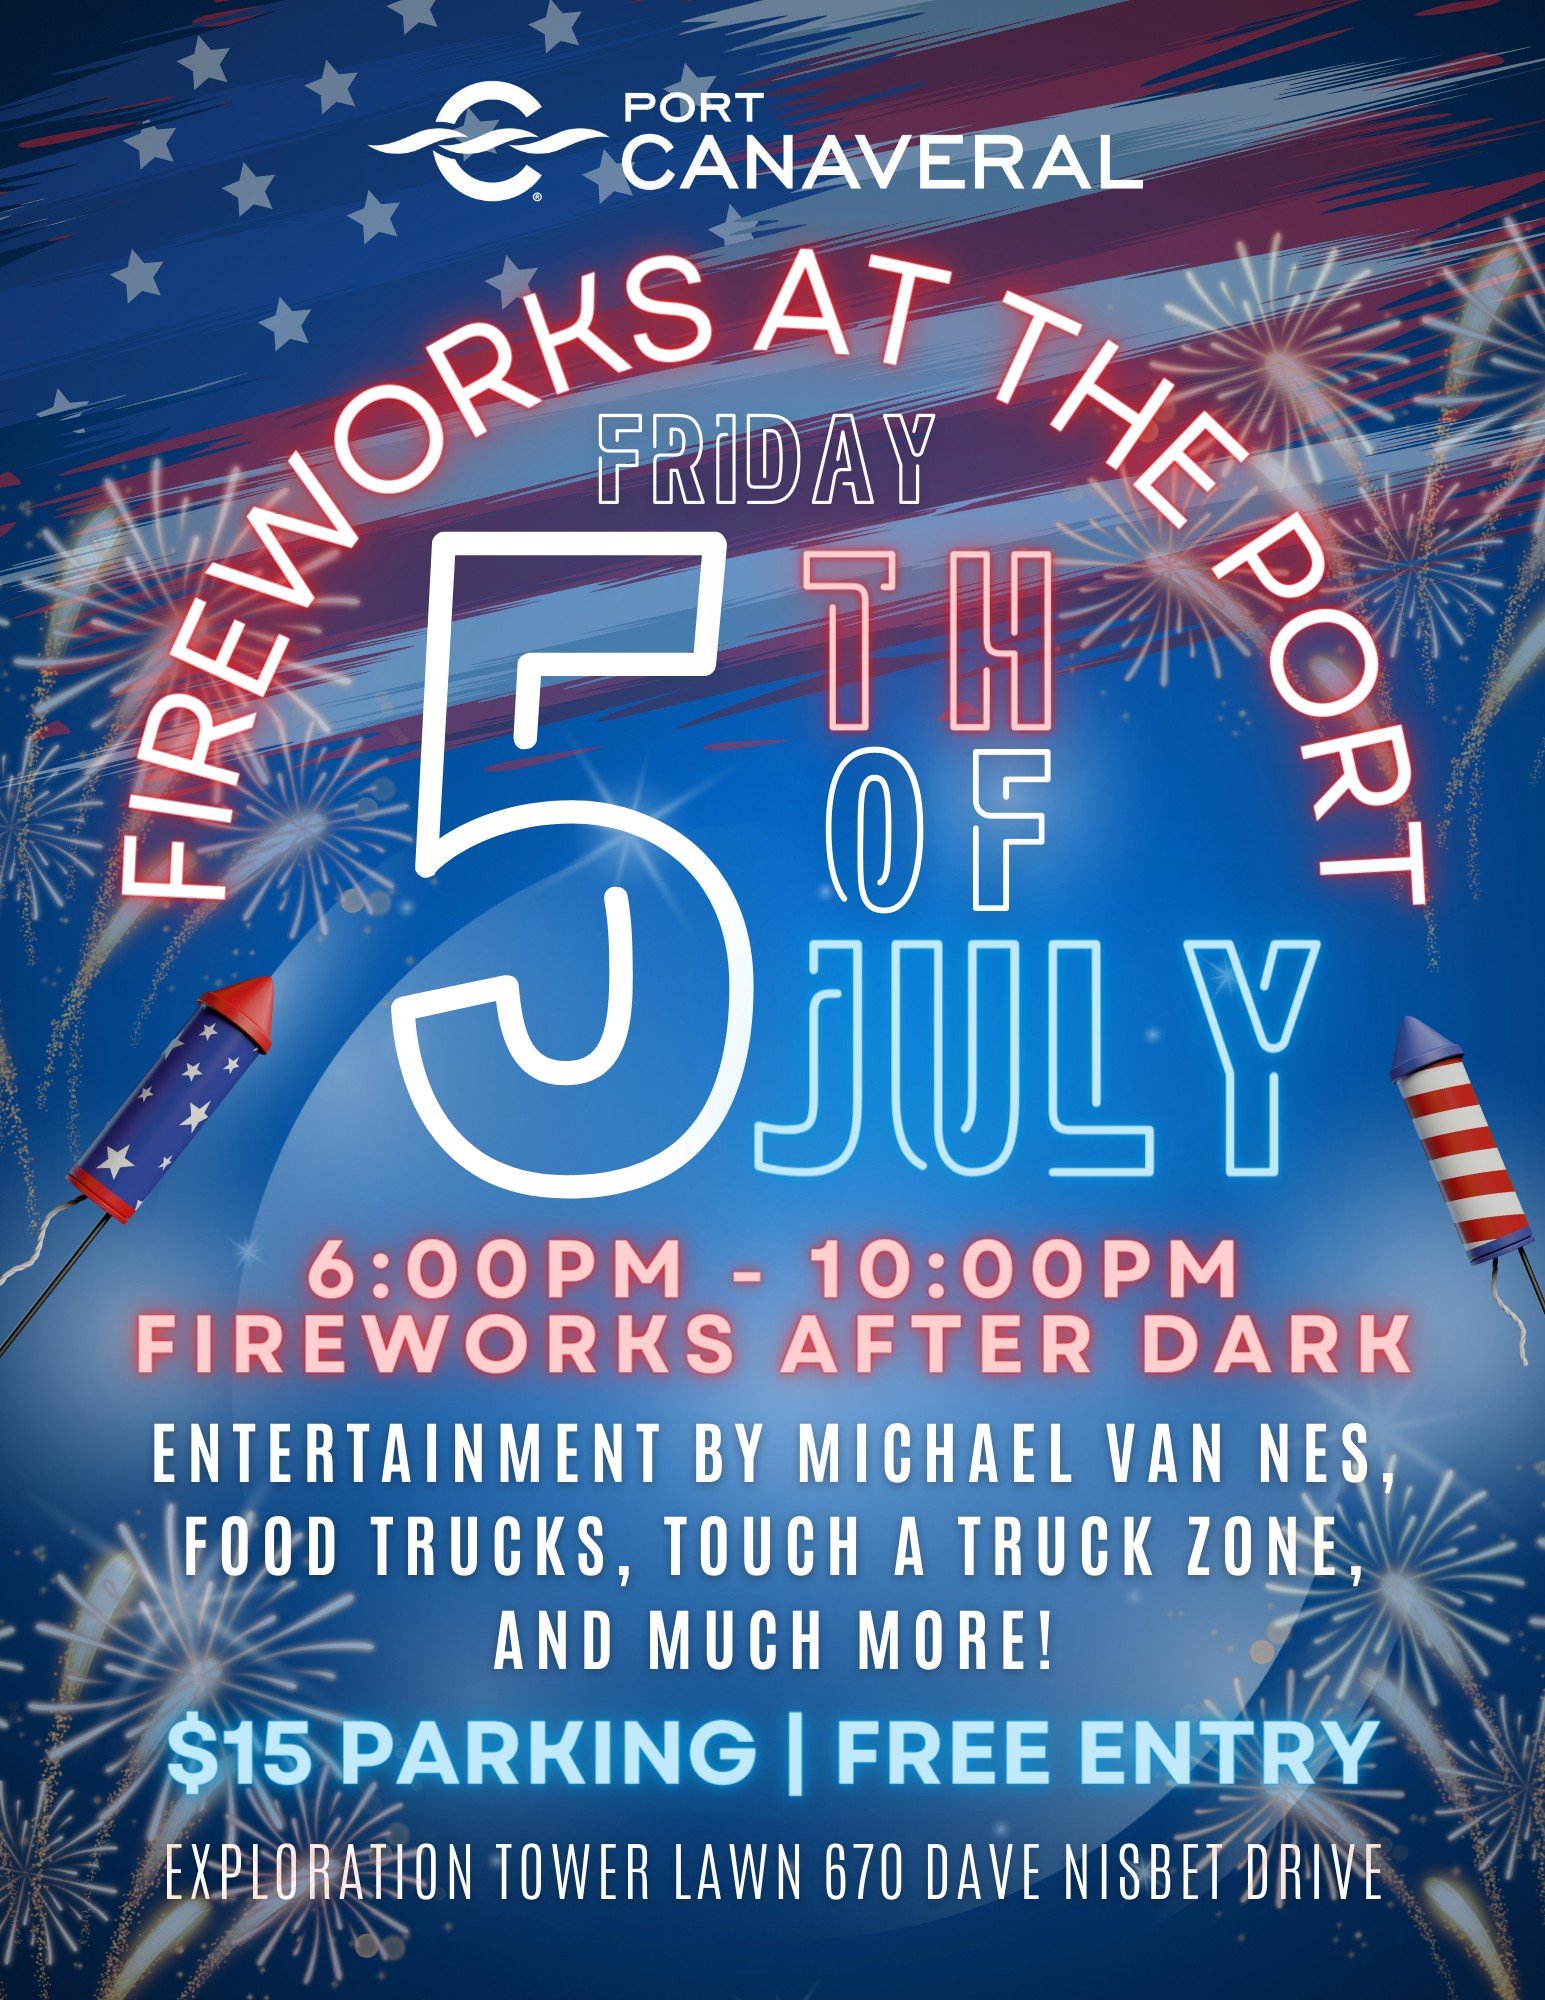 Fireworks at Port Canaveral Flyer July 5 6-10 Exploration Tower Lawn